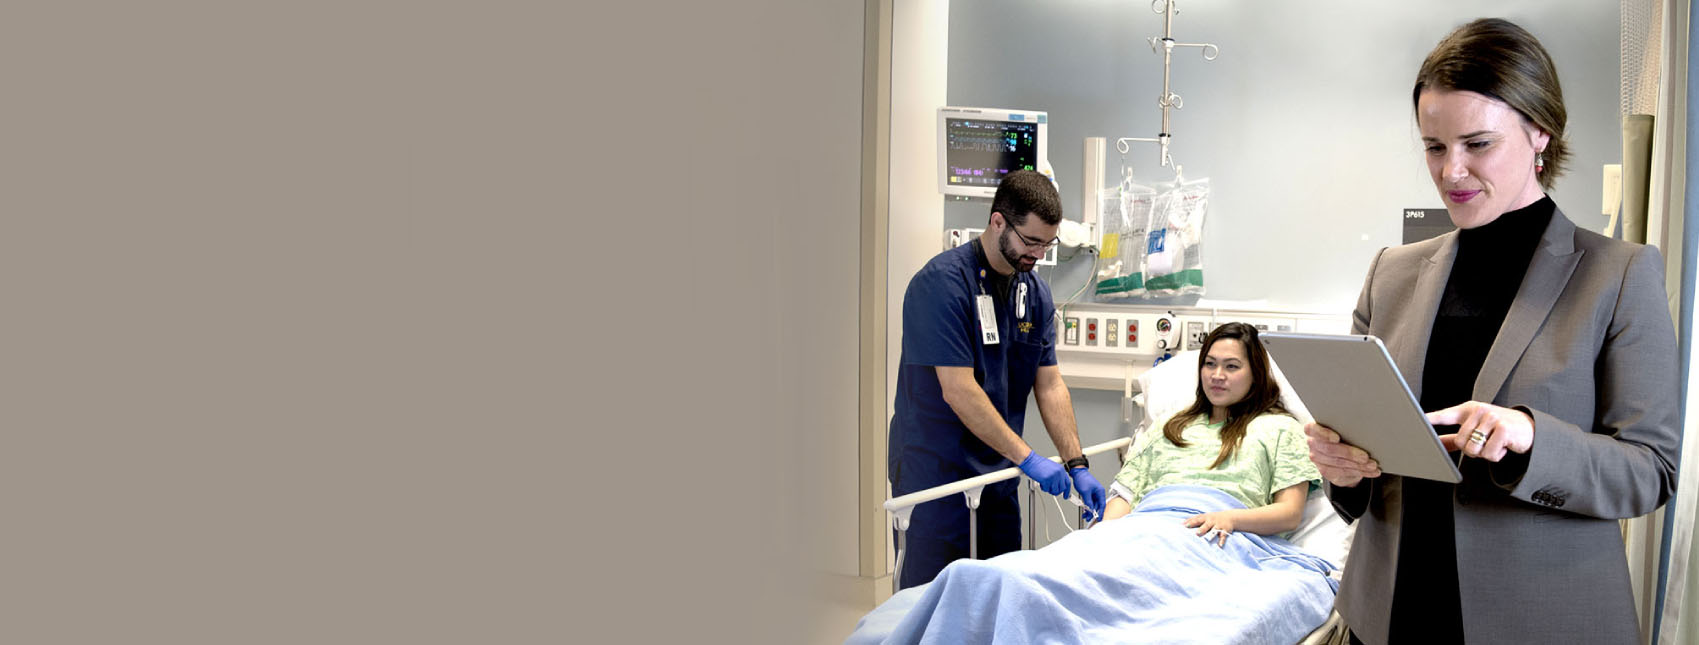 Specialist conducting inspection in hospital room with nurse and patient